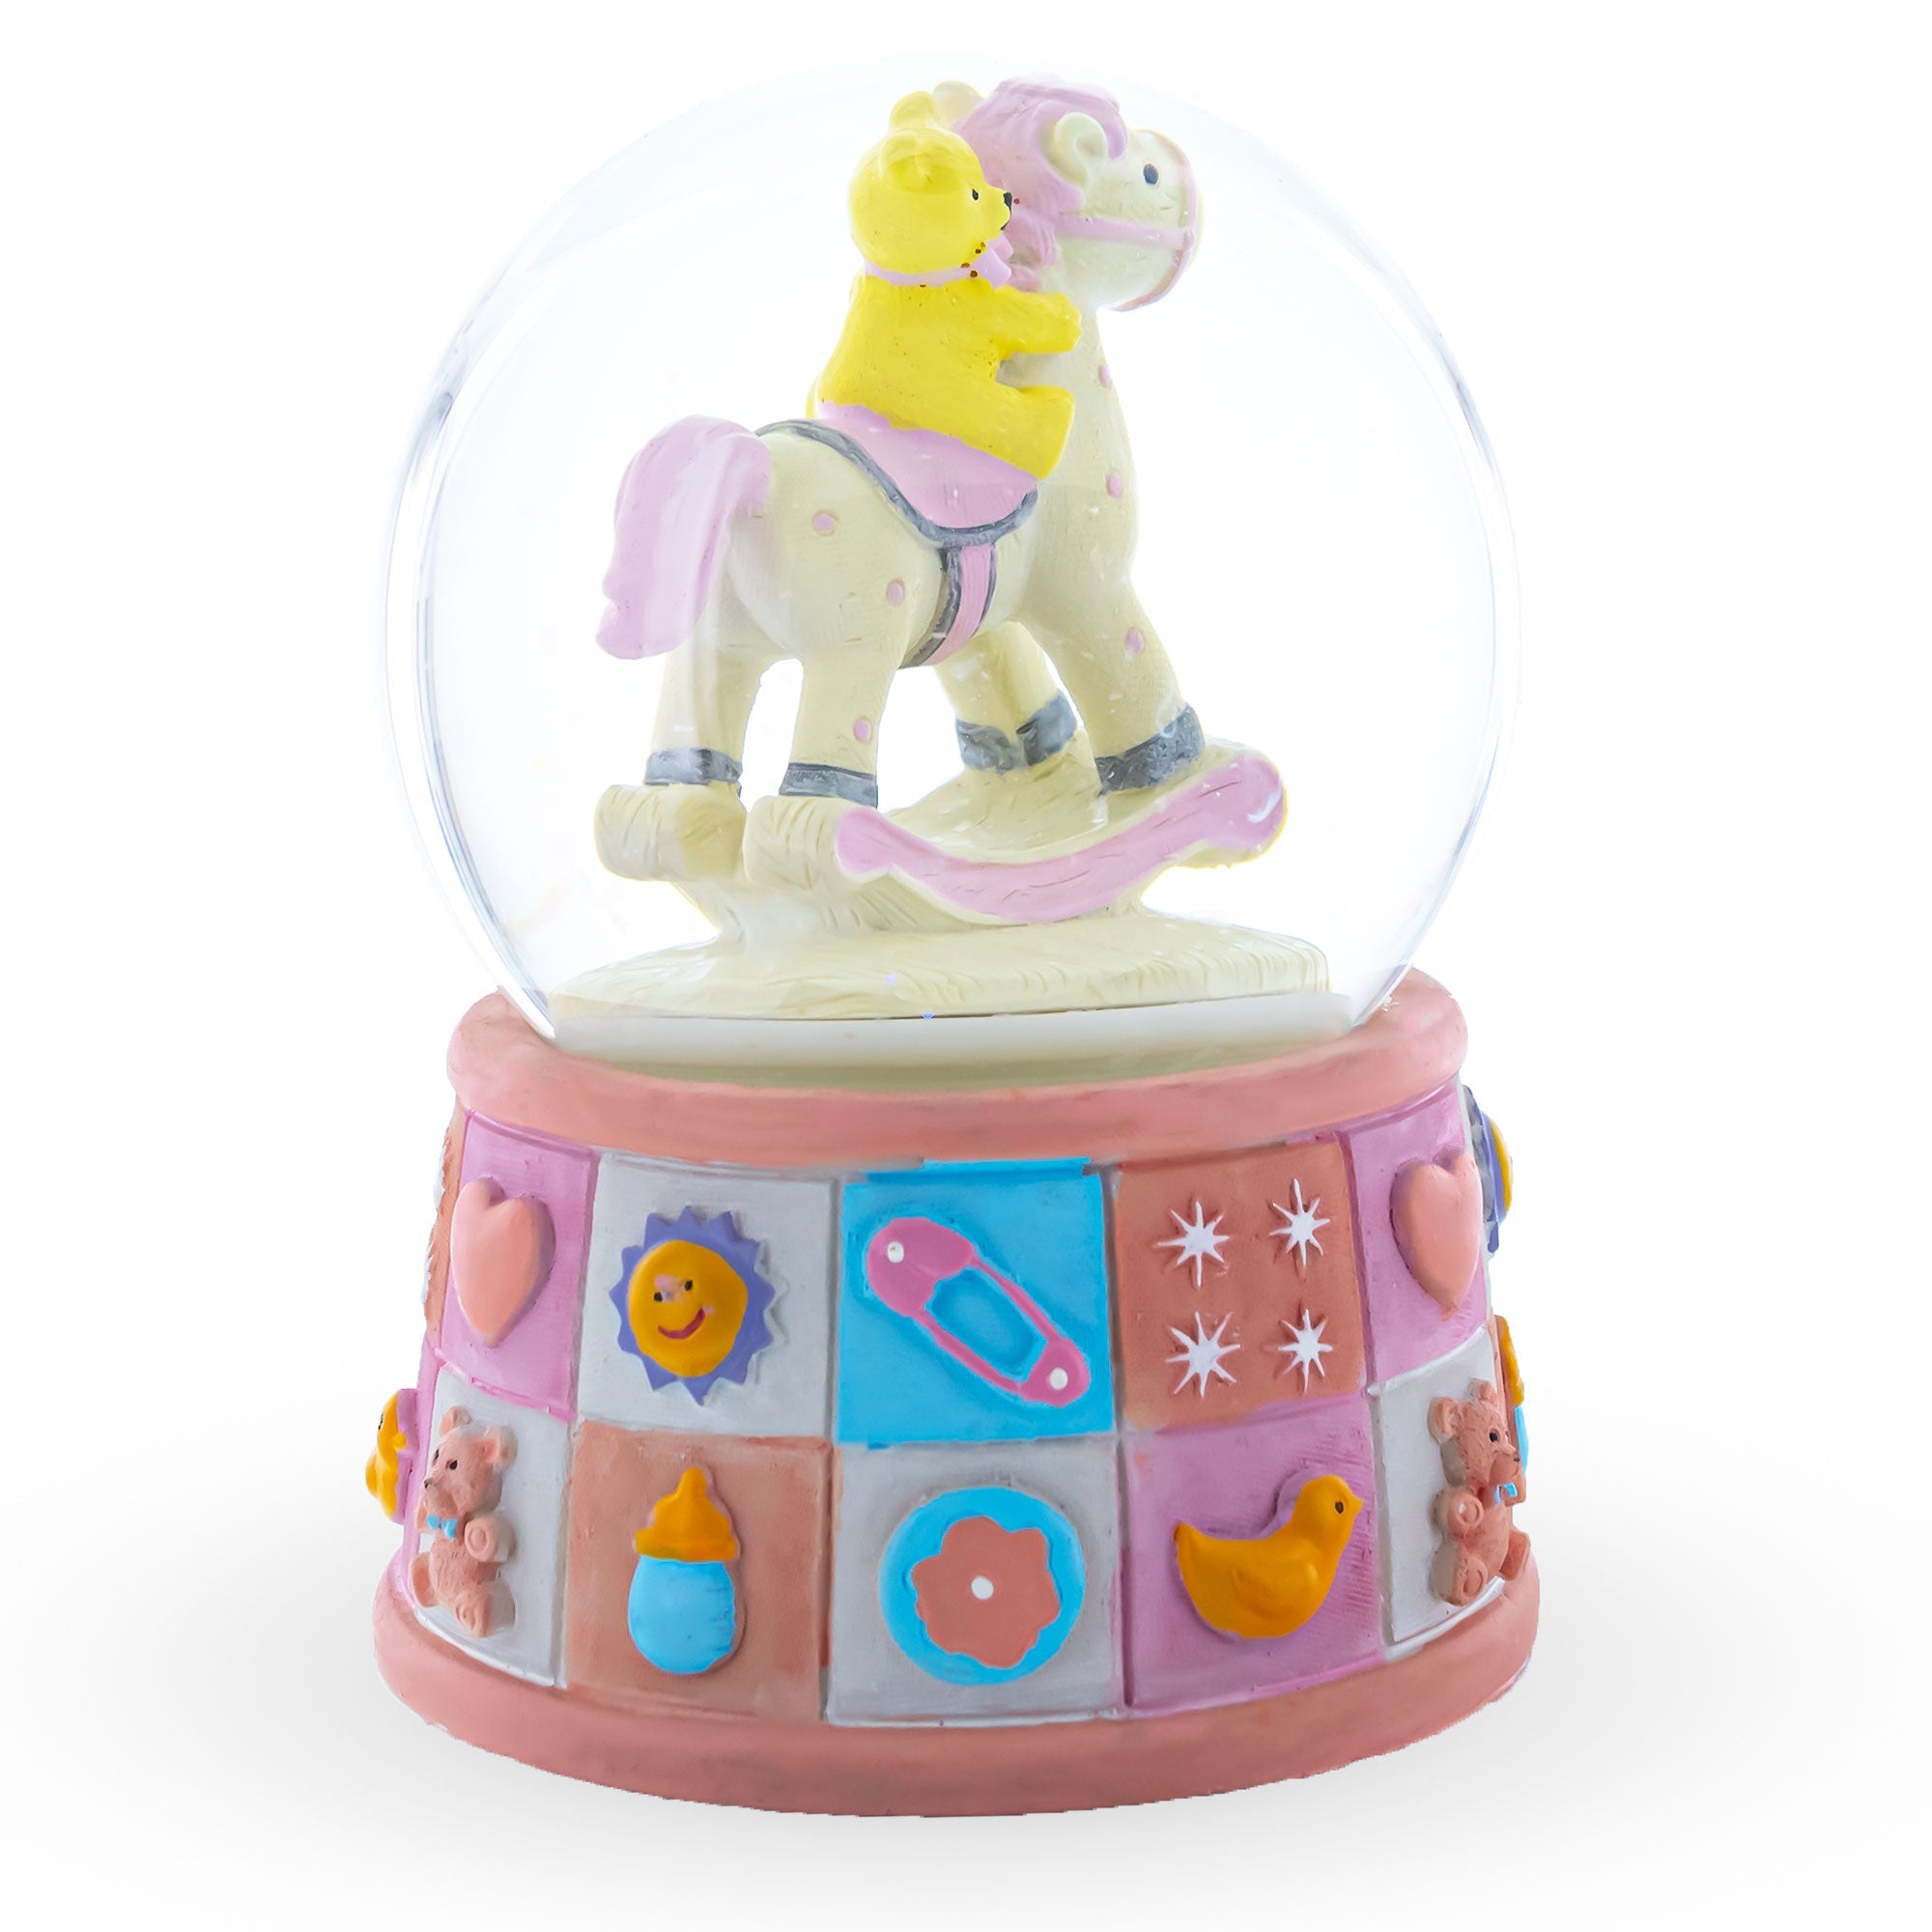 Lullaby Teddy On Rocking Horse: Musical Water Snow Globe For Baby Girl Gift